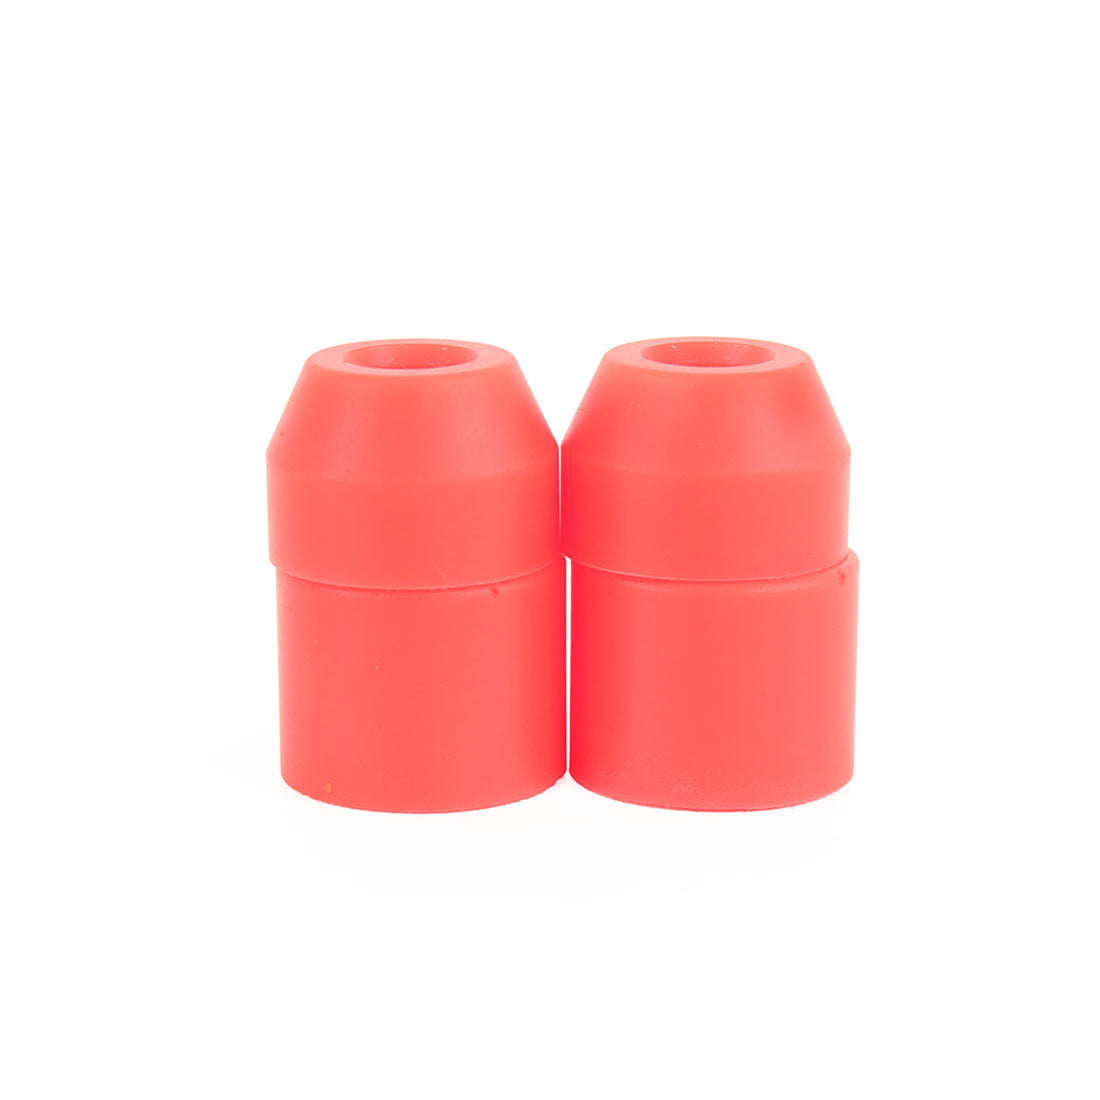 Spew Monkey 95a Super-Carve Cone/Barrel Bushings Combo 4pk - Fluro Red Skateboard Hardware and Parts